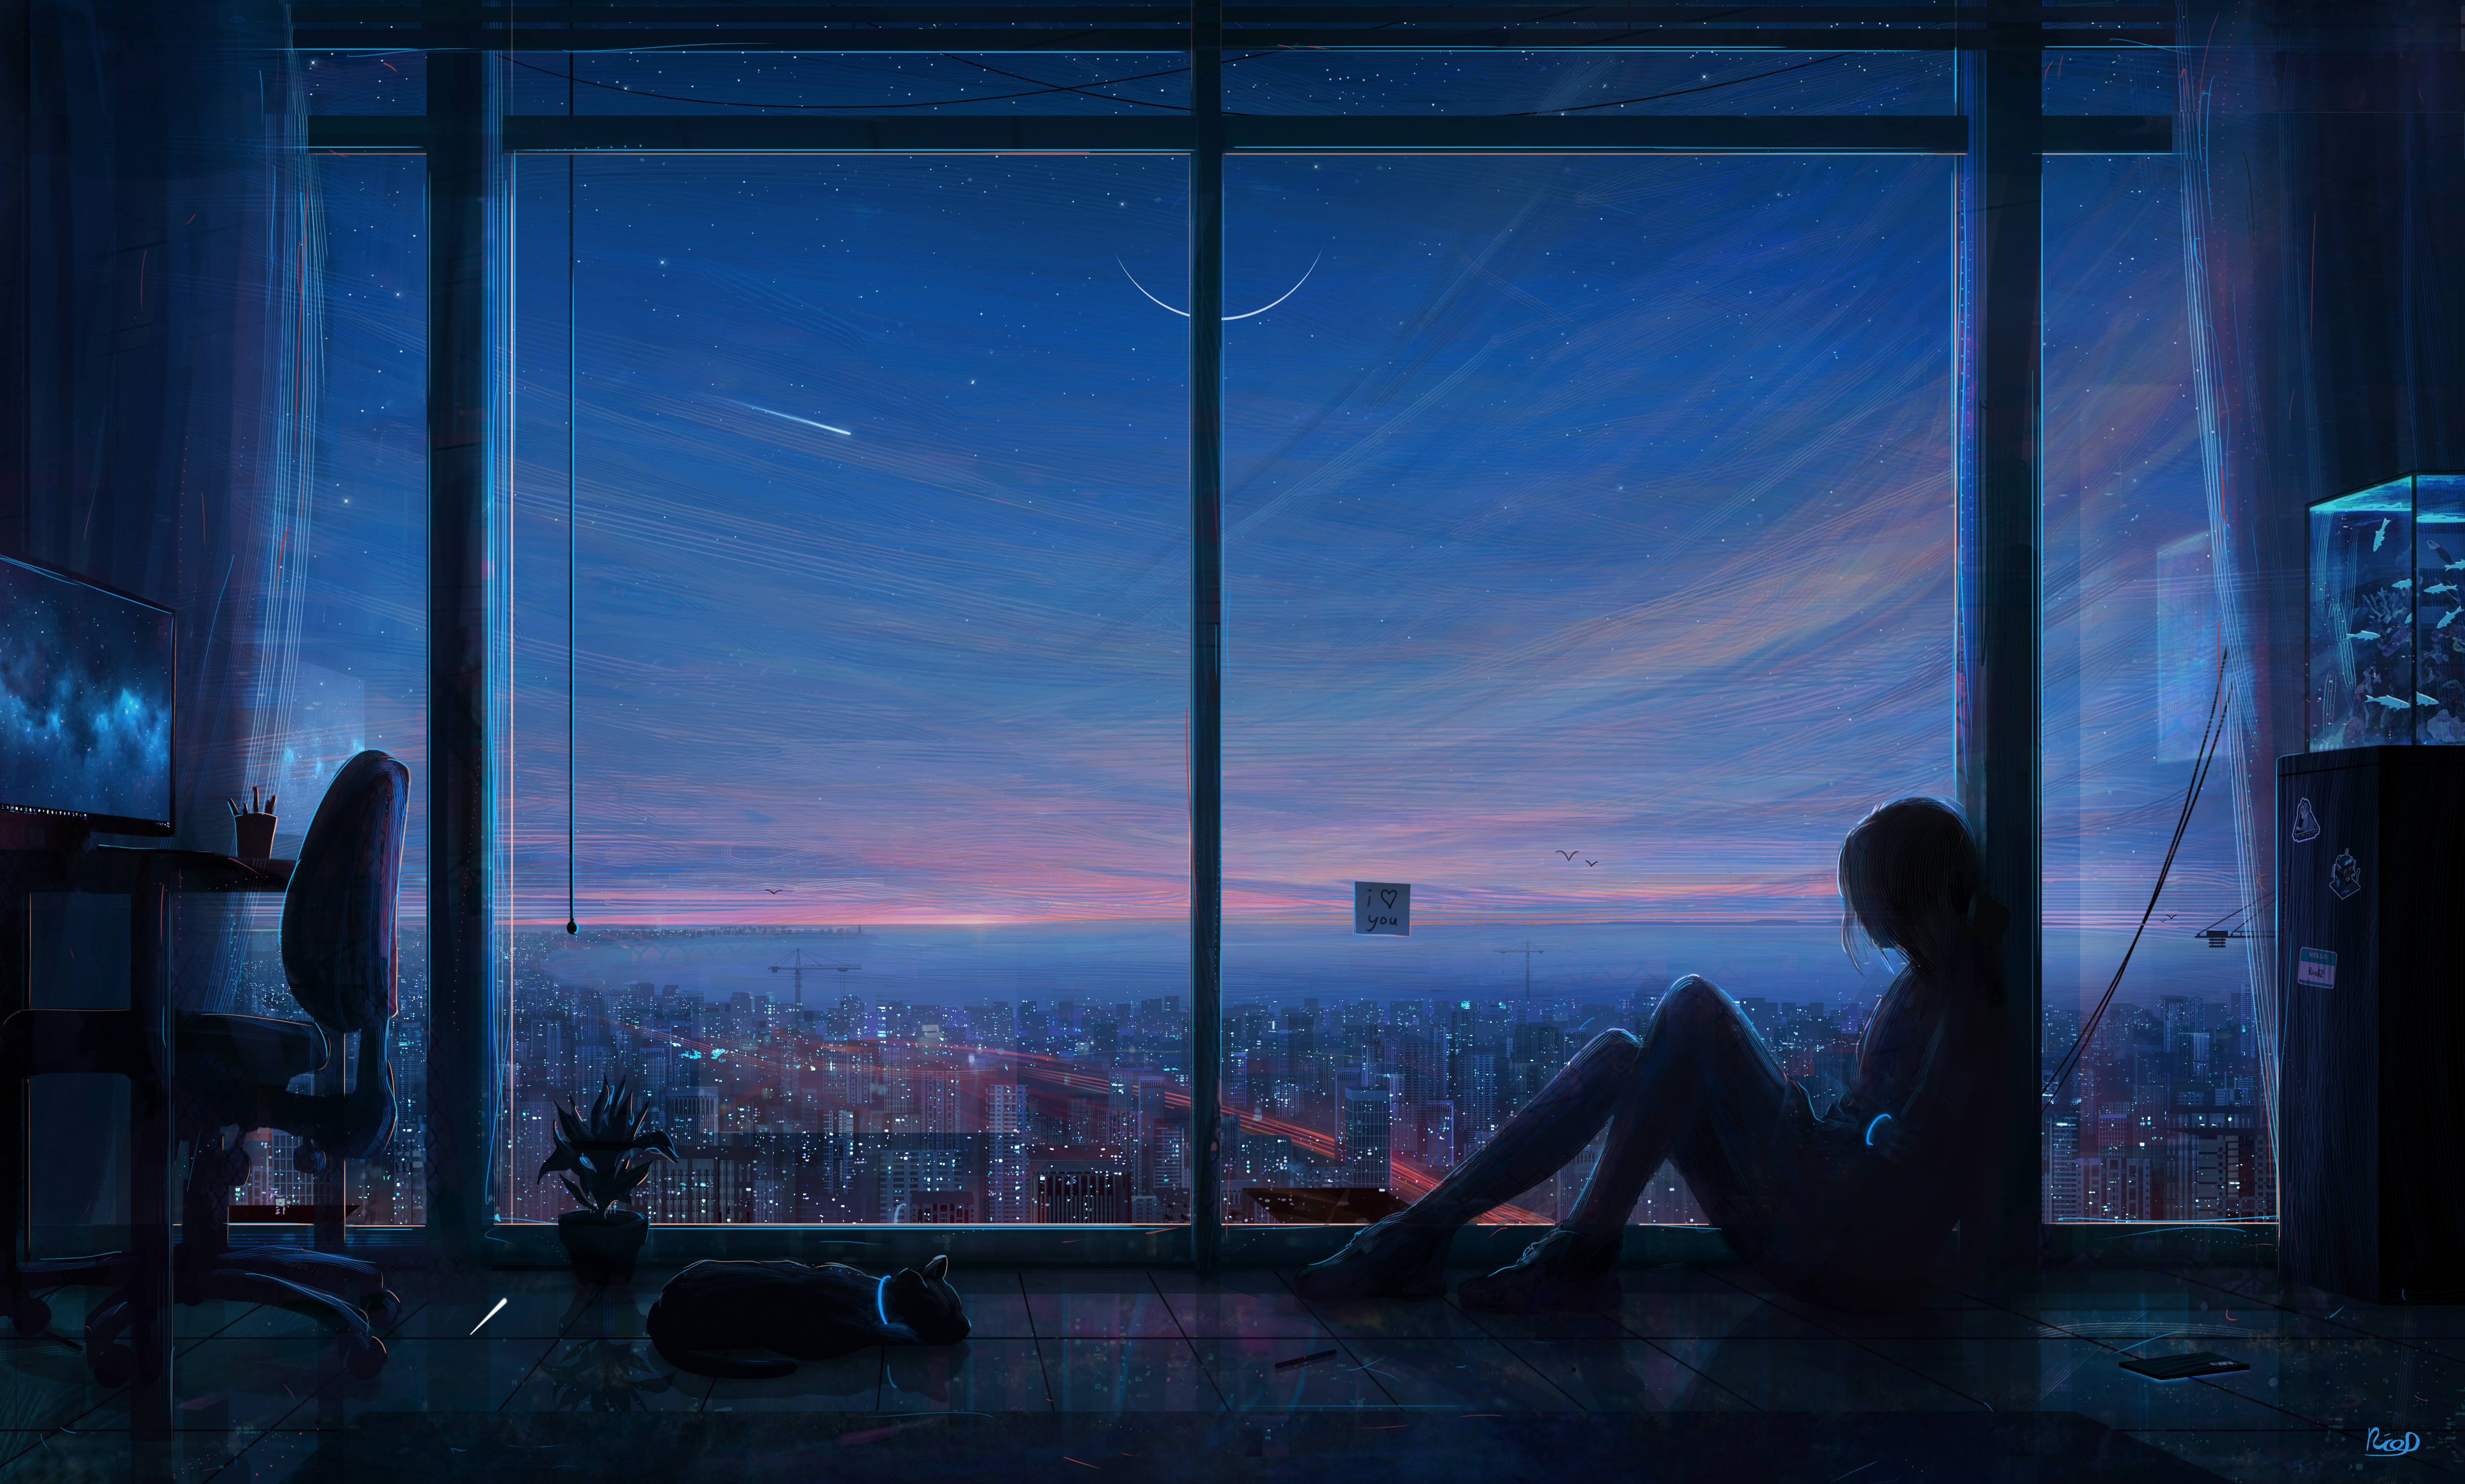 General 4865x2929 artwork neon post-it notes window cityscape sky indoors animals stars sitting looking out window RicoDZ painting aquarium